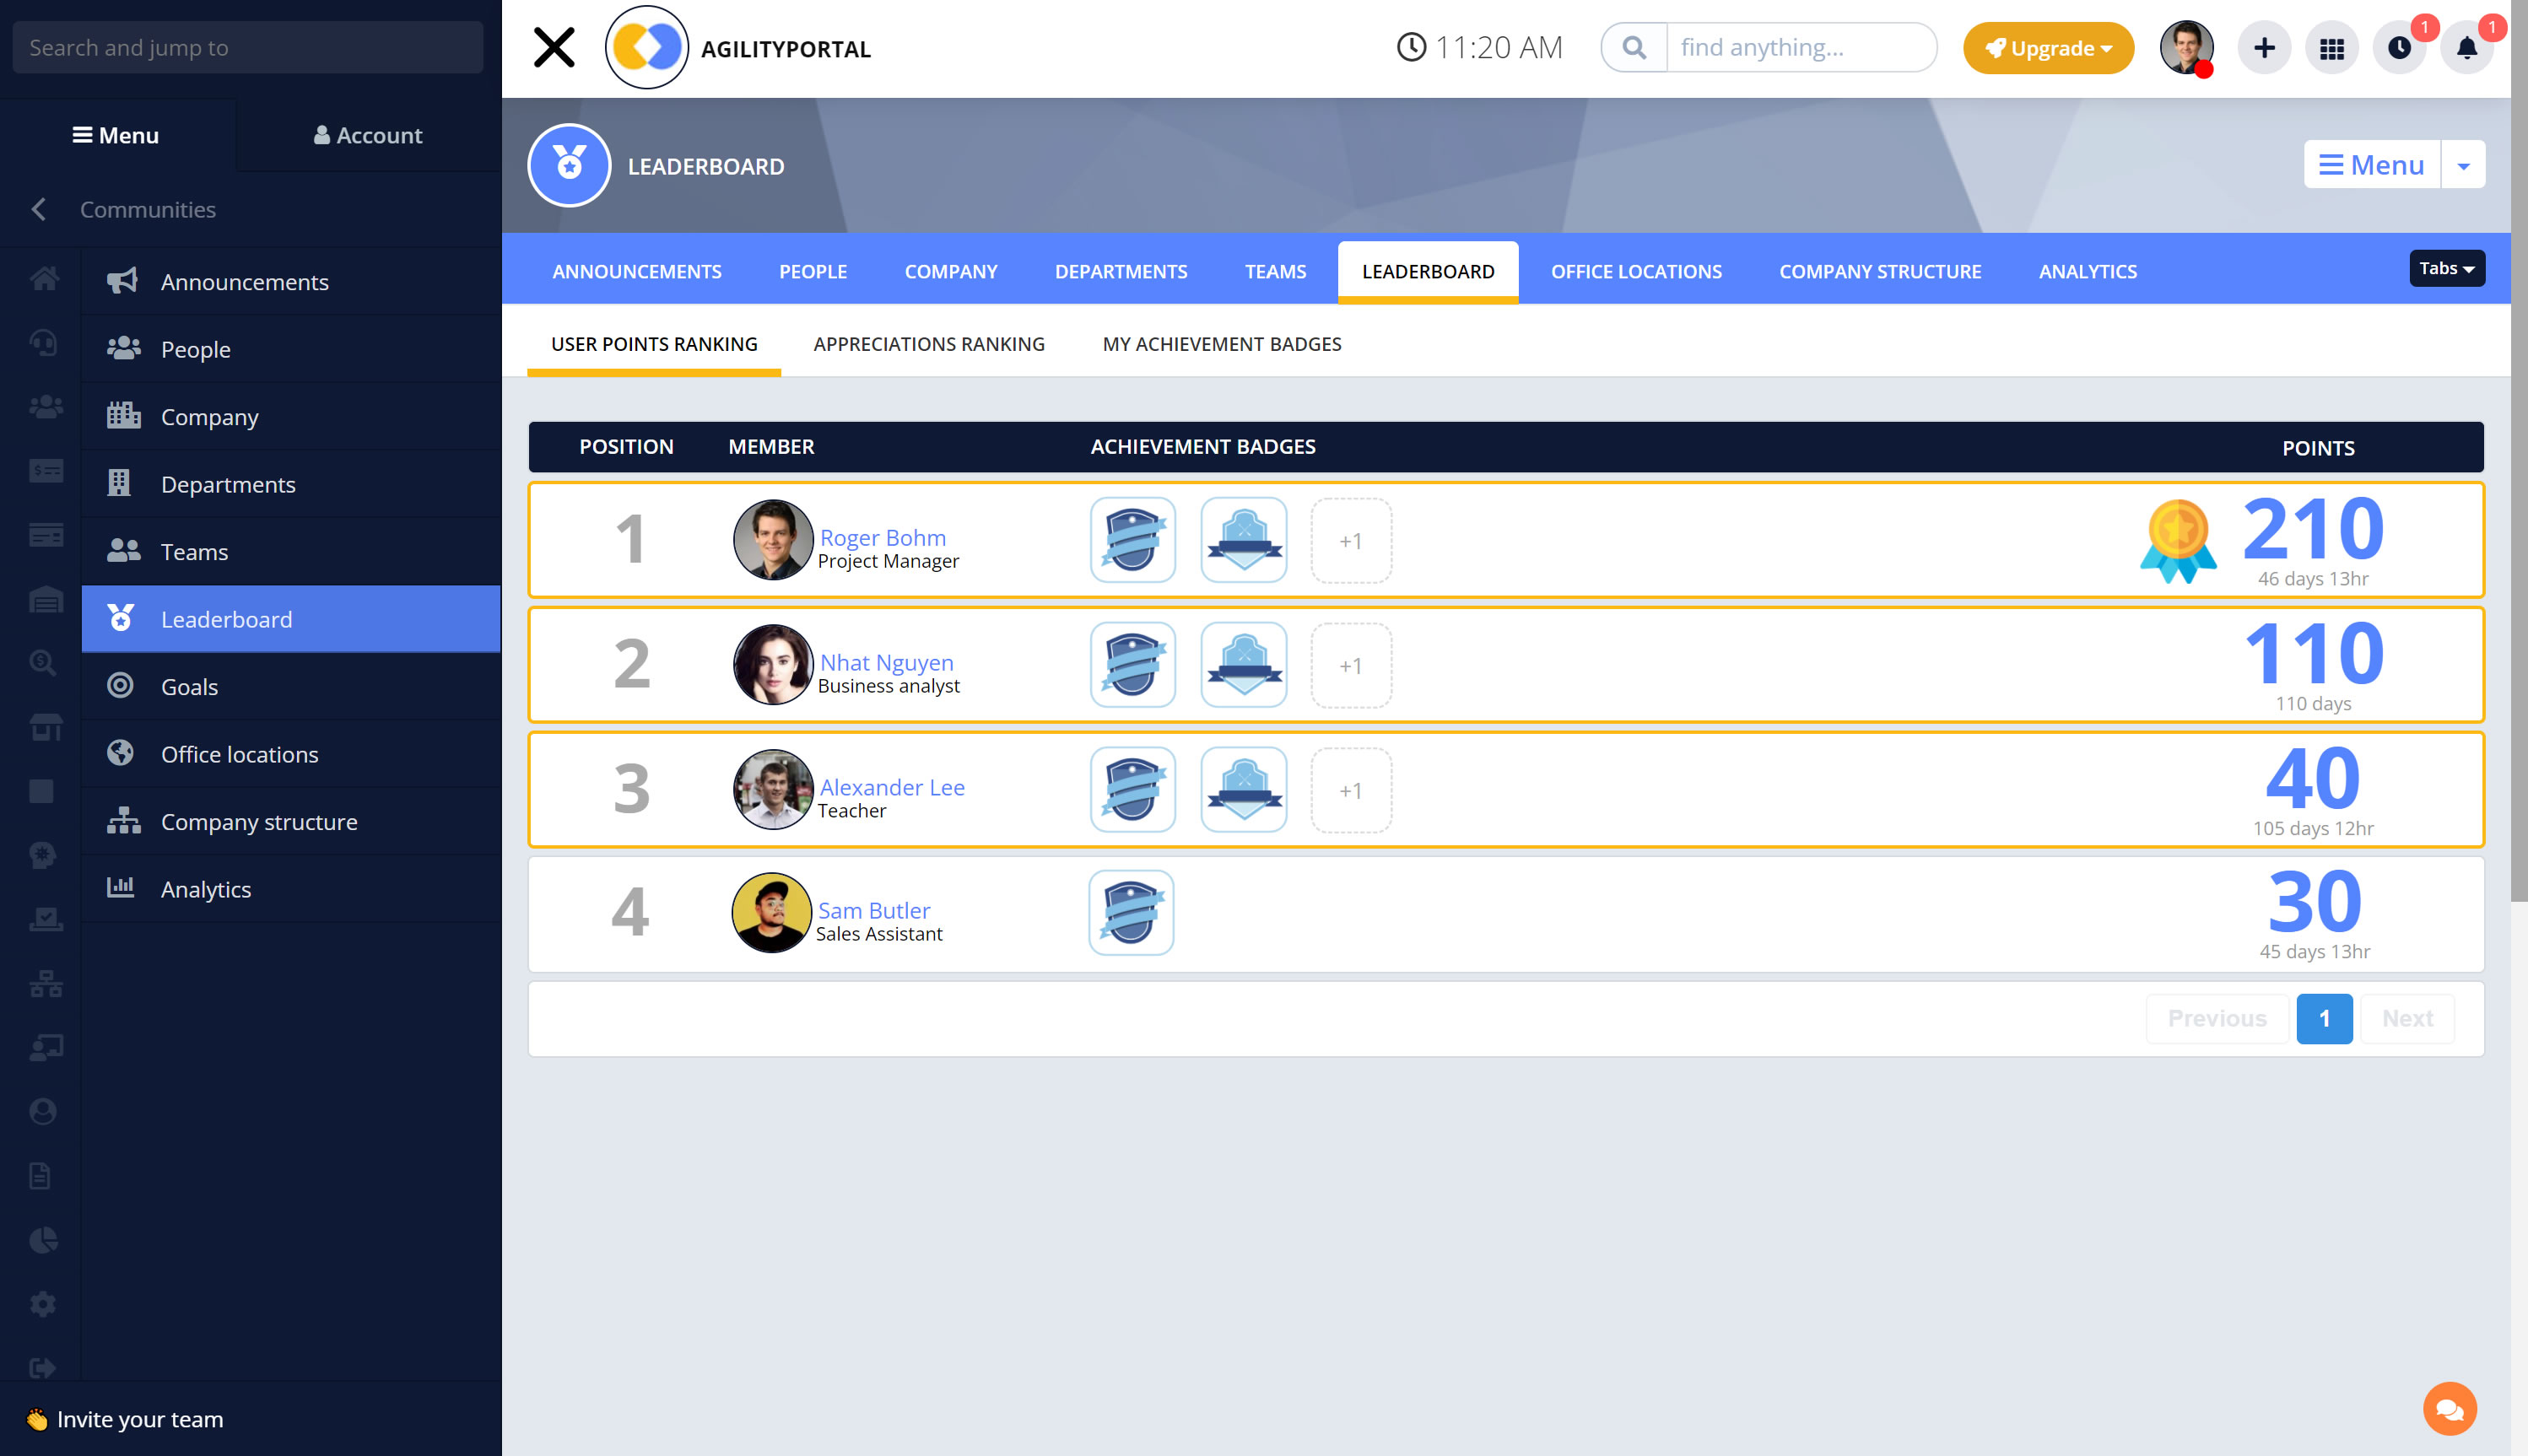 7 Leaderboard templates for intranet dashboards - The 2021 edition